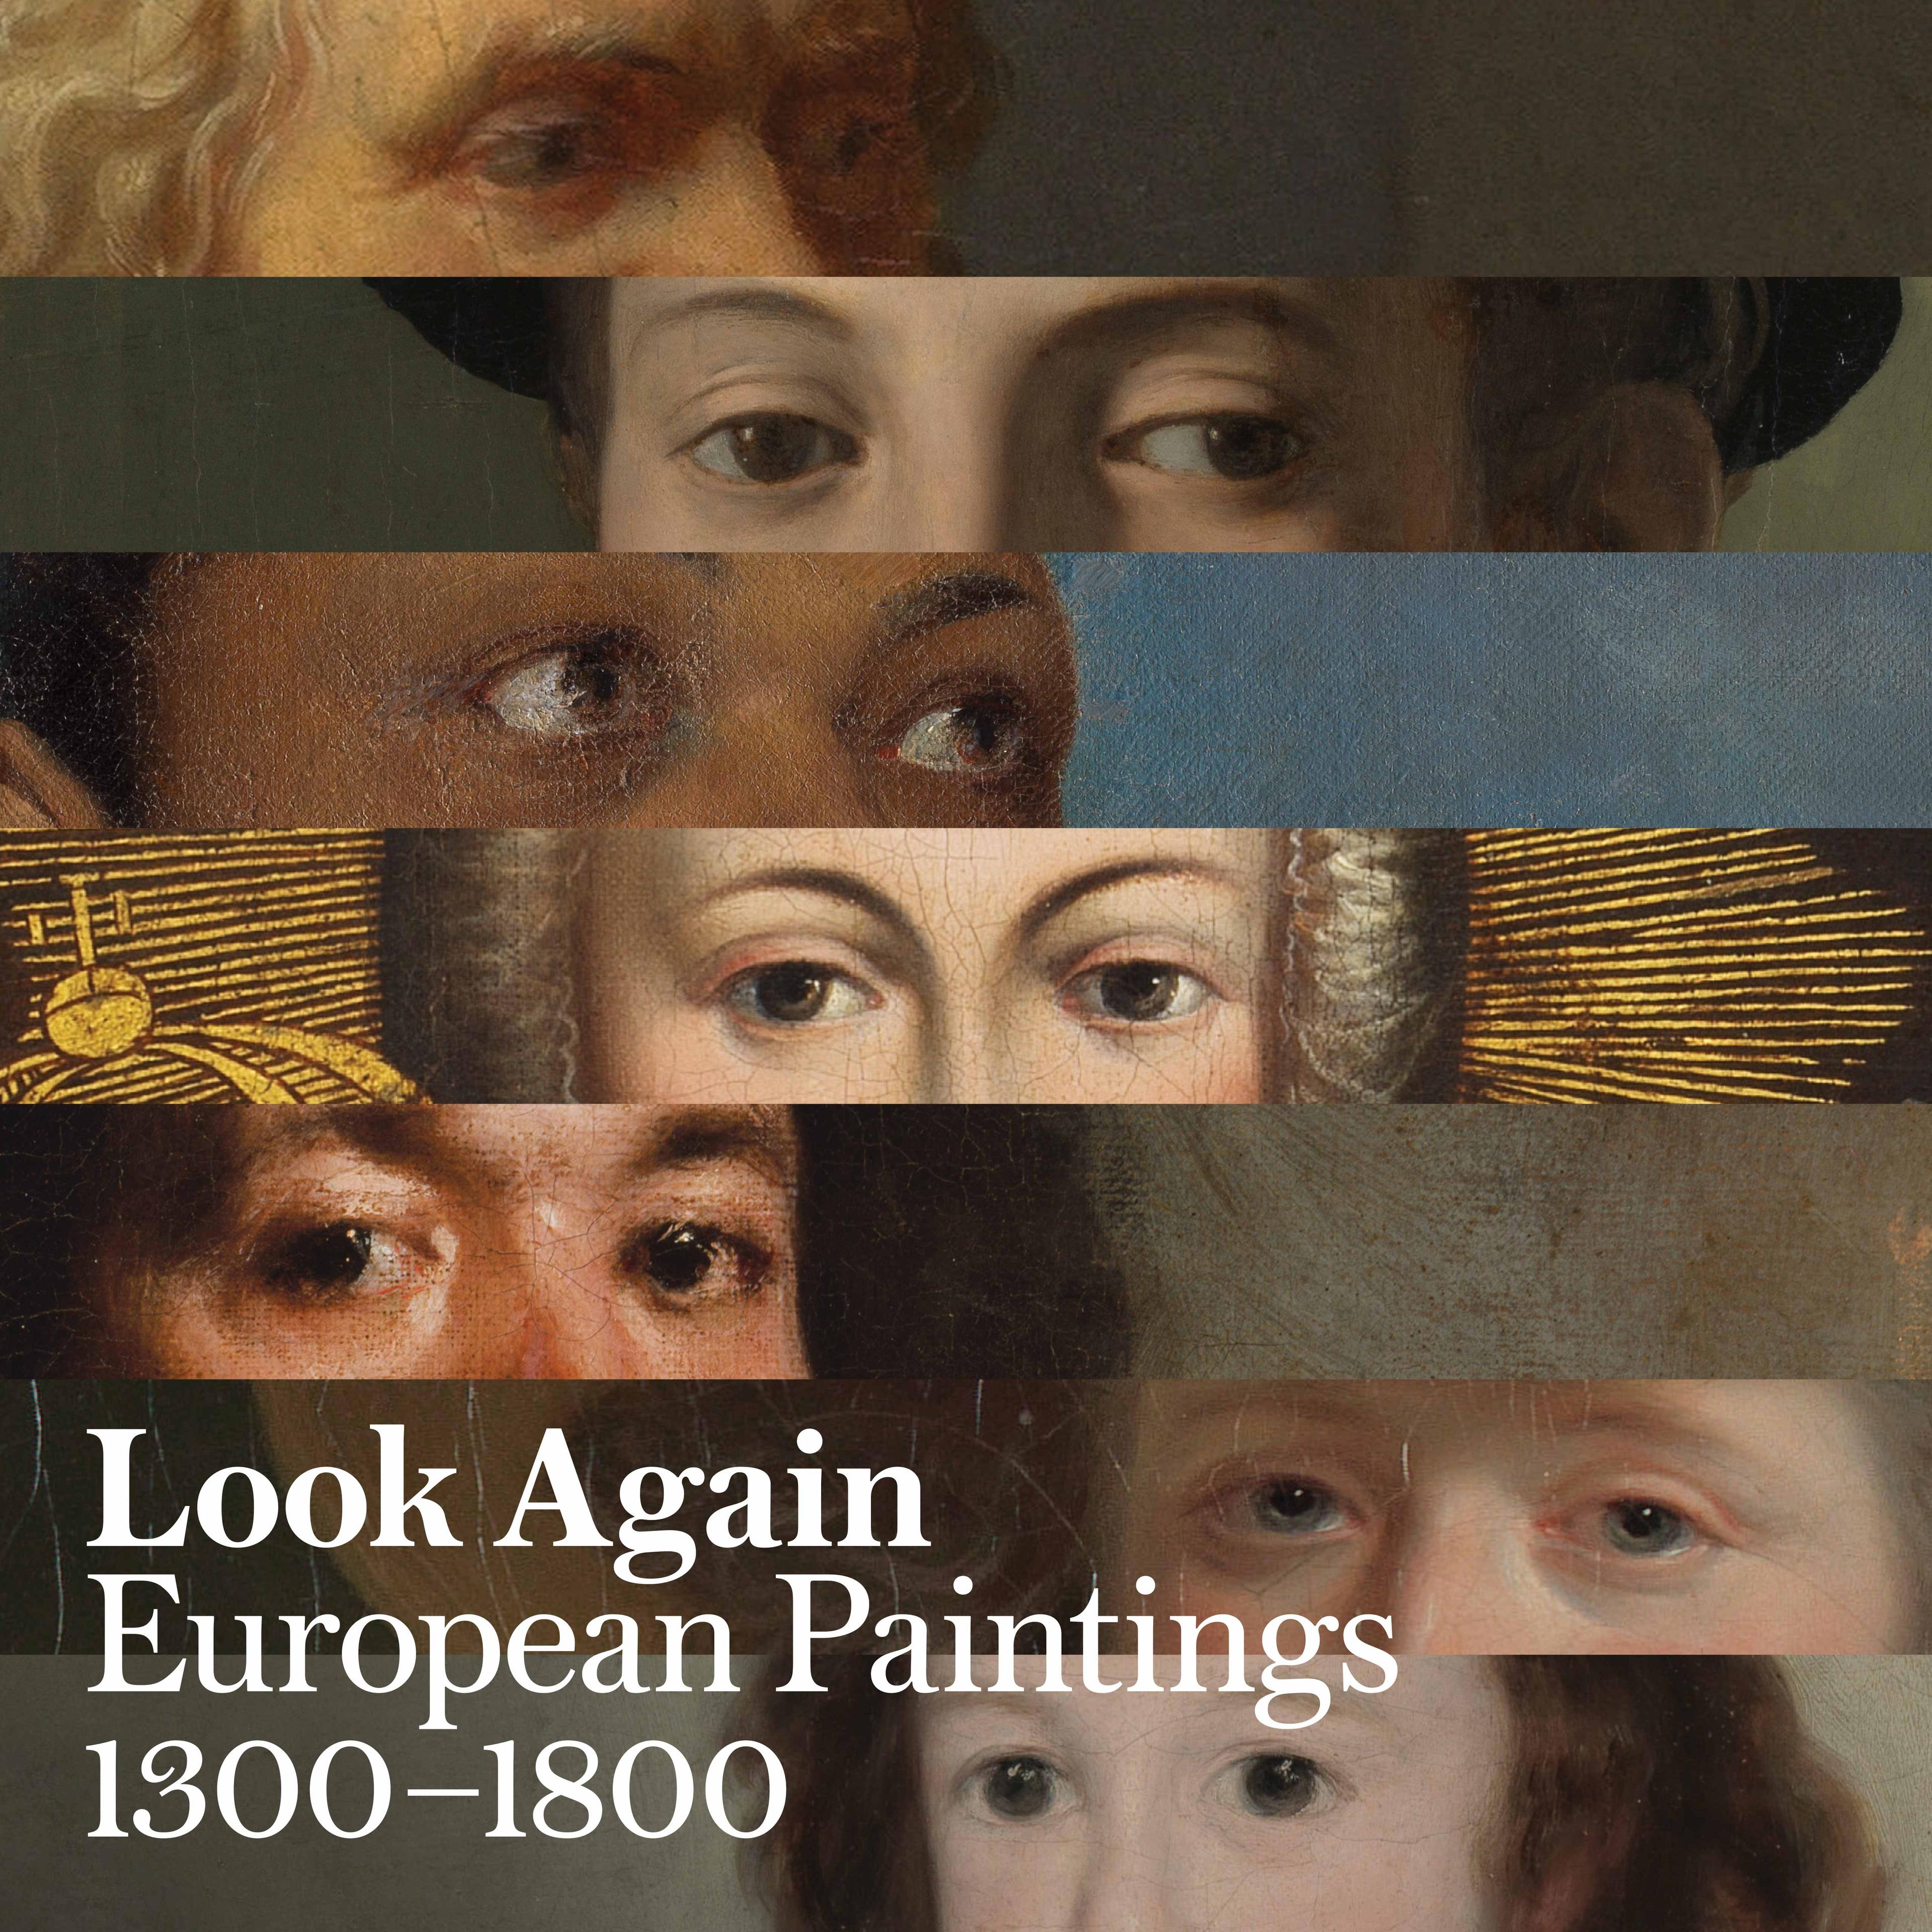 Graphic of seven distinct paintings, each composed of strips that reveal the eyes, with text overlay that says "Look Again: European Paintings 1300—1800"